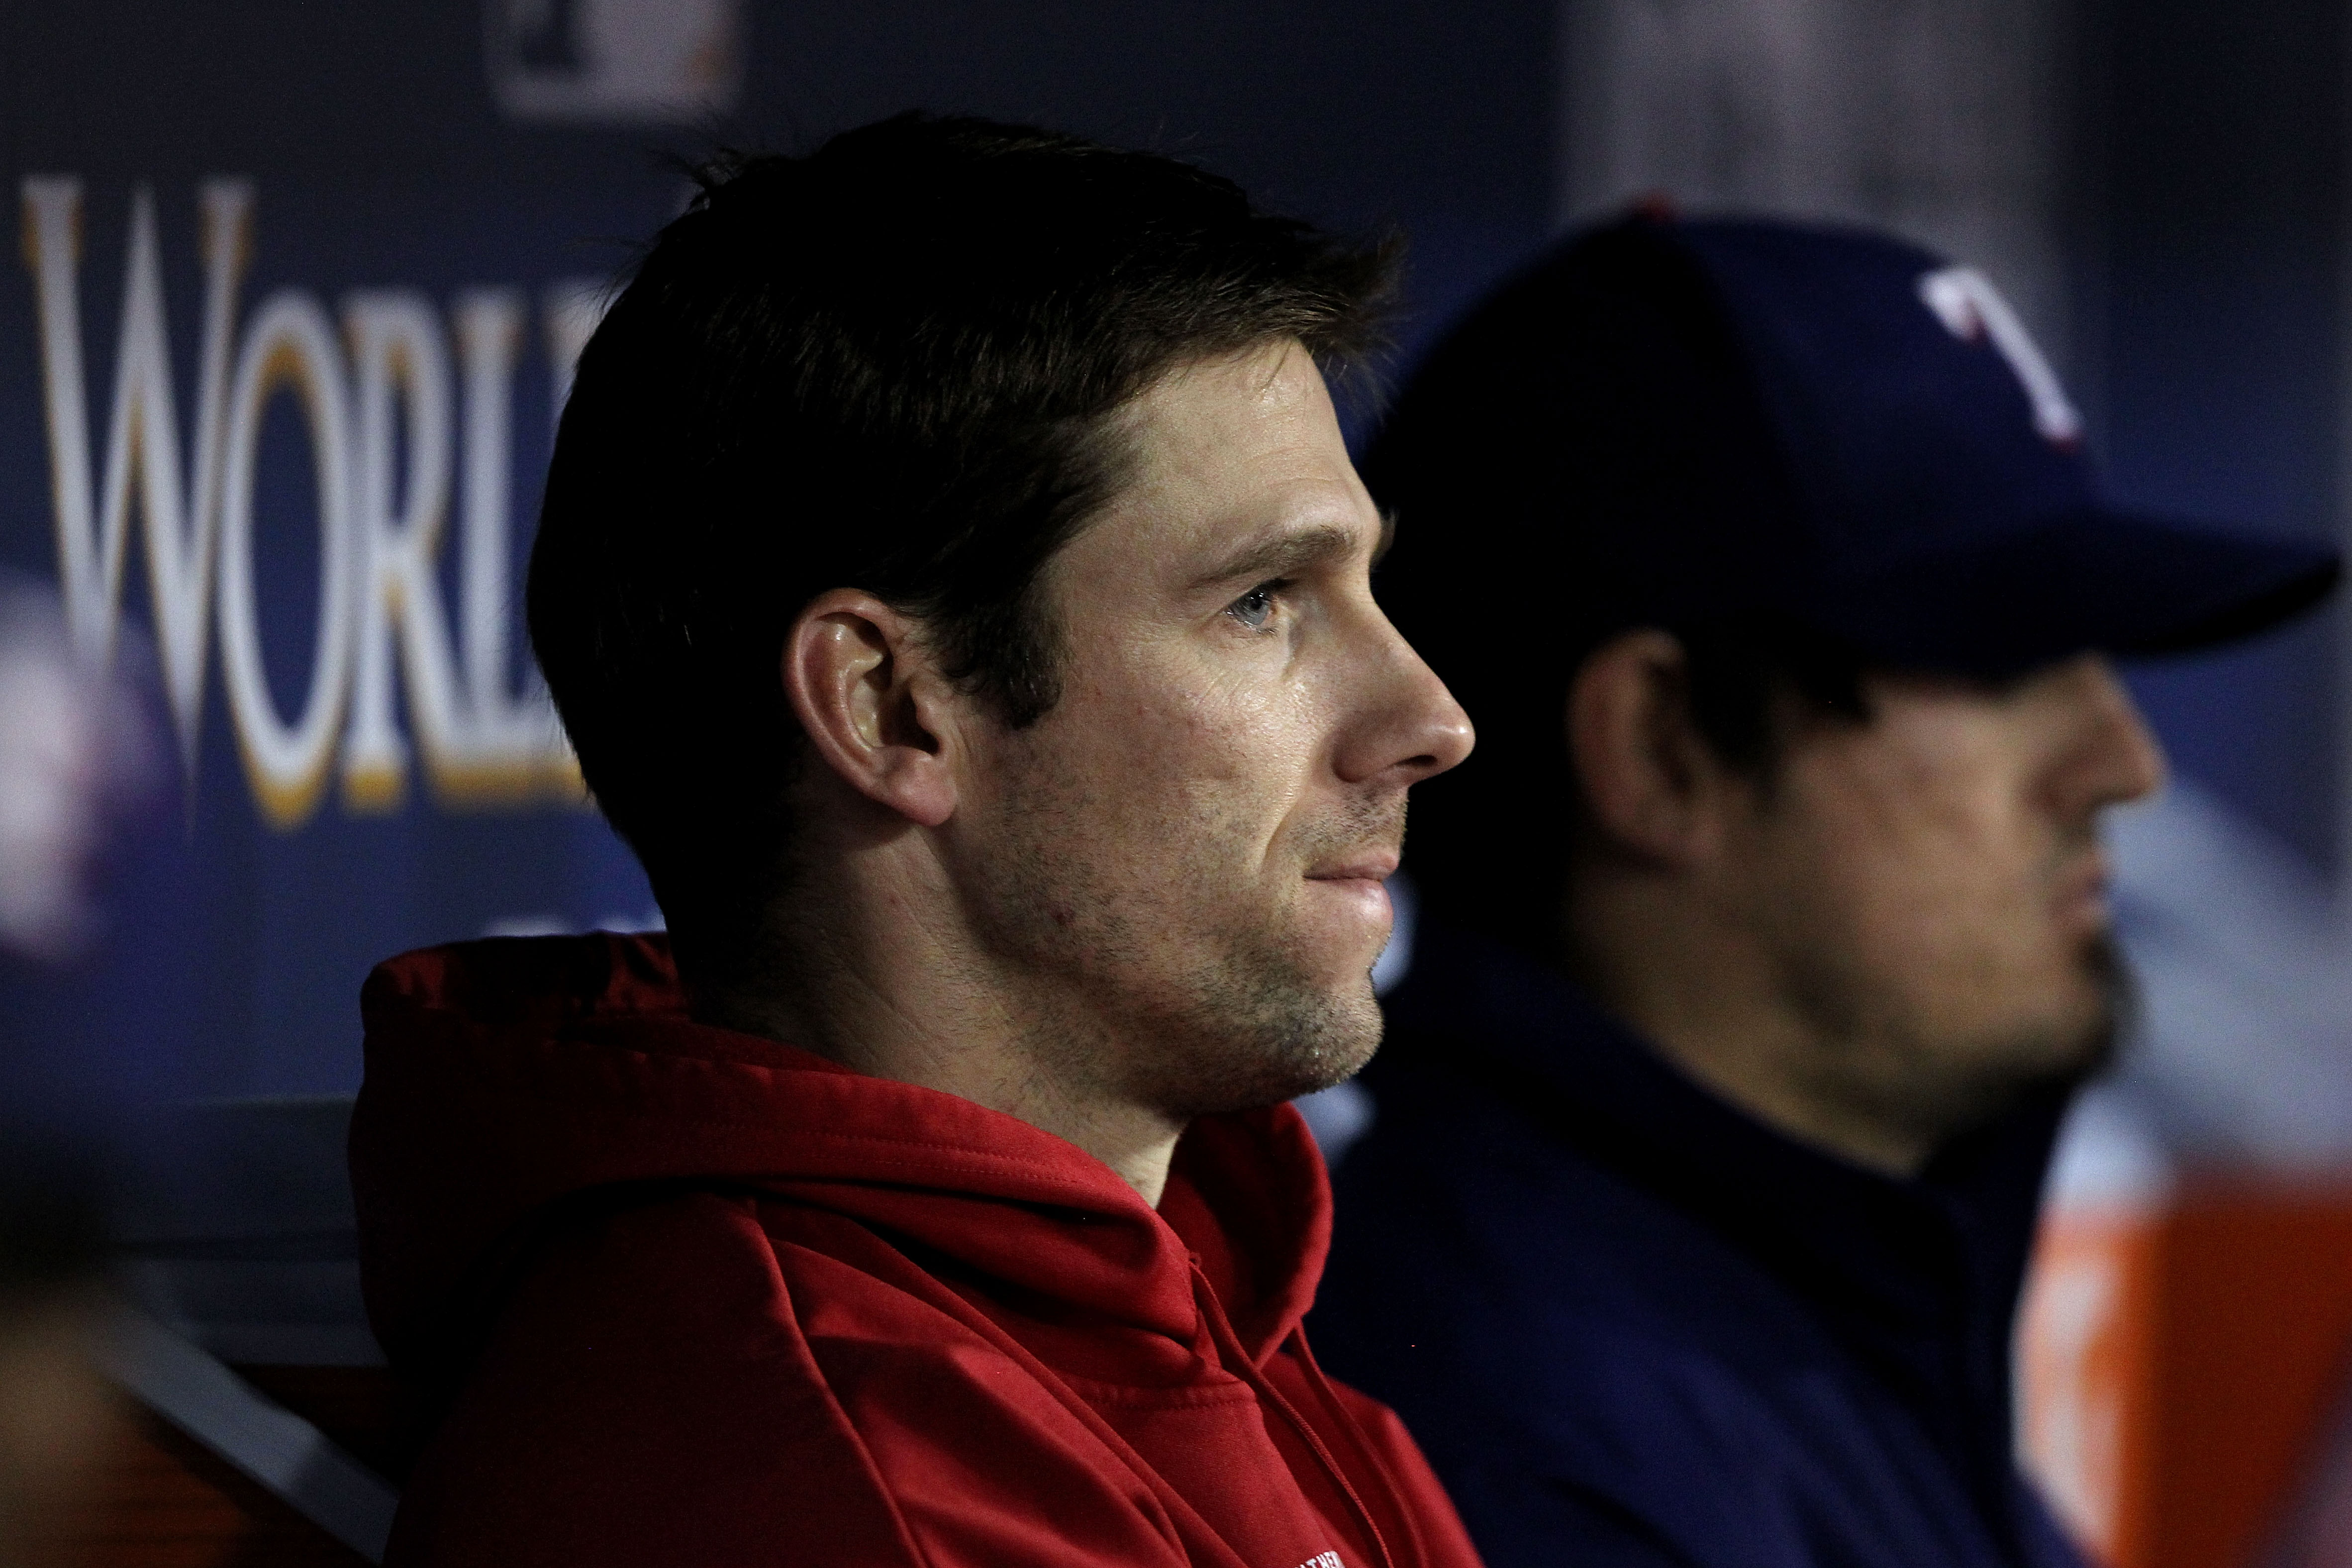 ARLINGTON, TX - NOVEMBER 01:  Losing pitcher Cliff Lee #33 of the Texas Rangers looks on from the dugout against the San Francisco Giants in Game Five of the 2010 MLB World Series at Rangers Ballpark in Arlington on November 1, 2010 in Arlington, Texas.